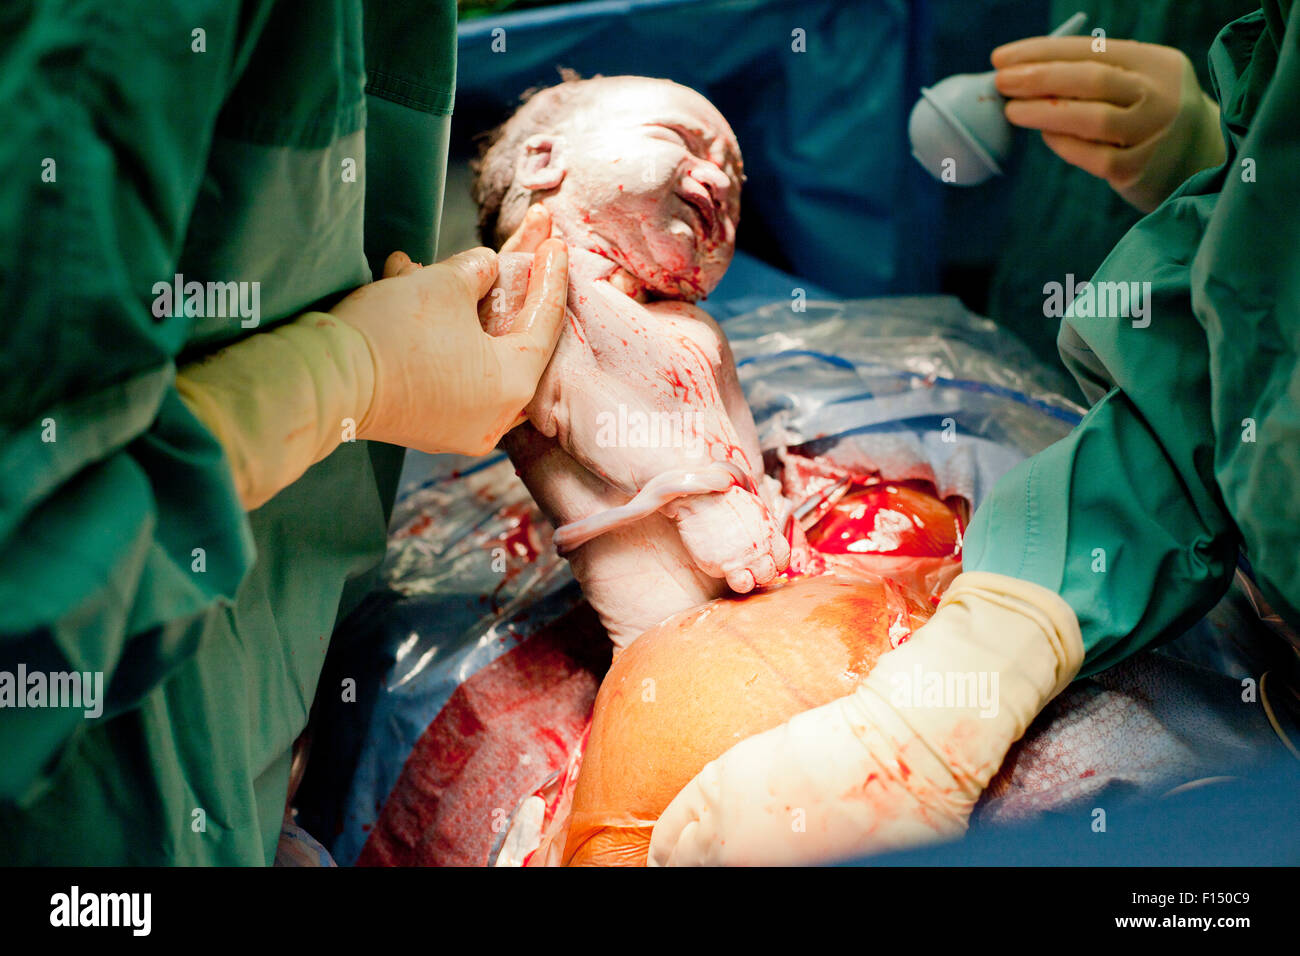 Baby being born via cesarian section operation Stock Photo